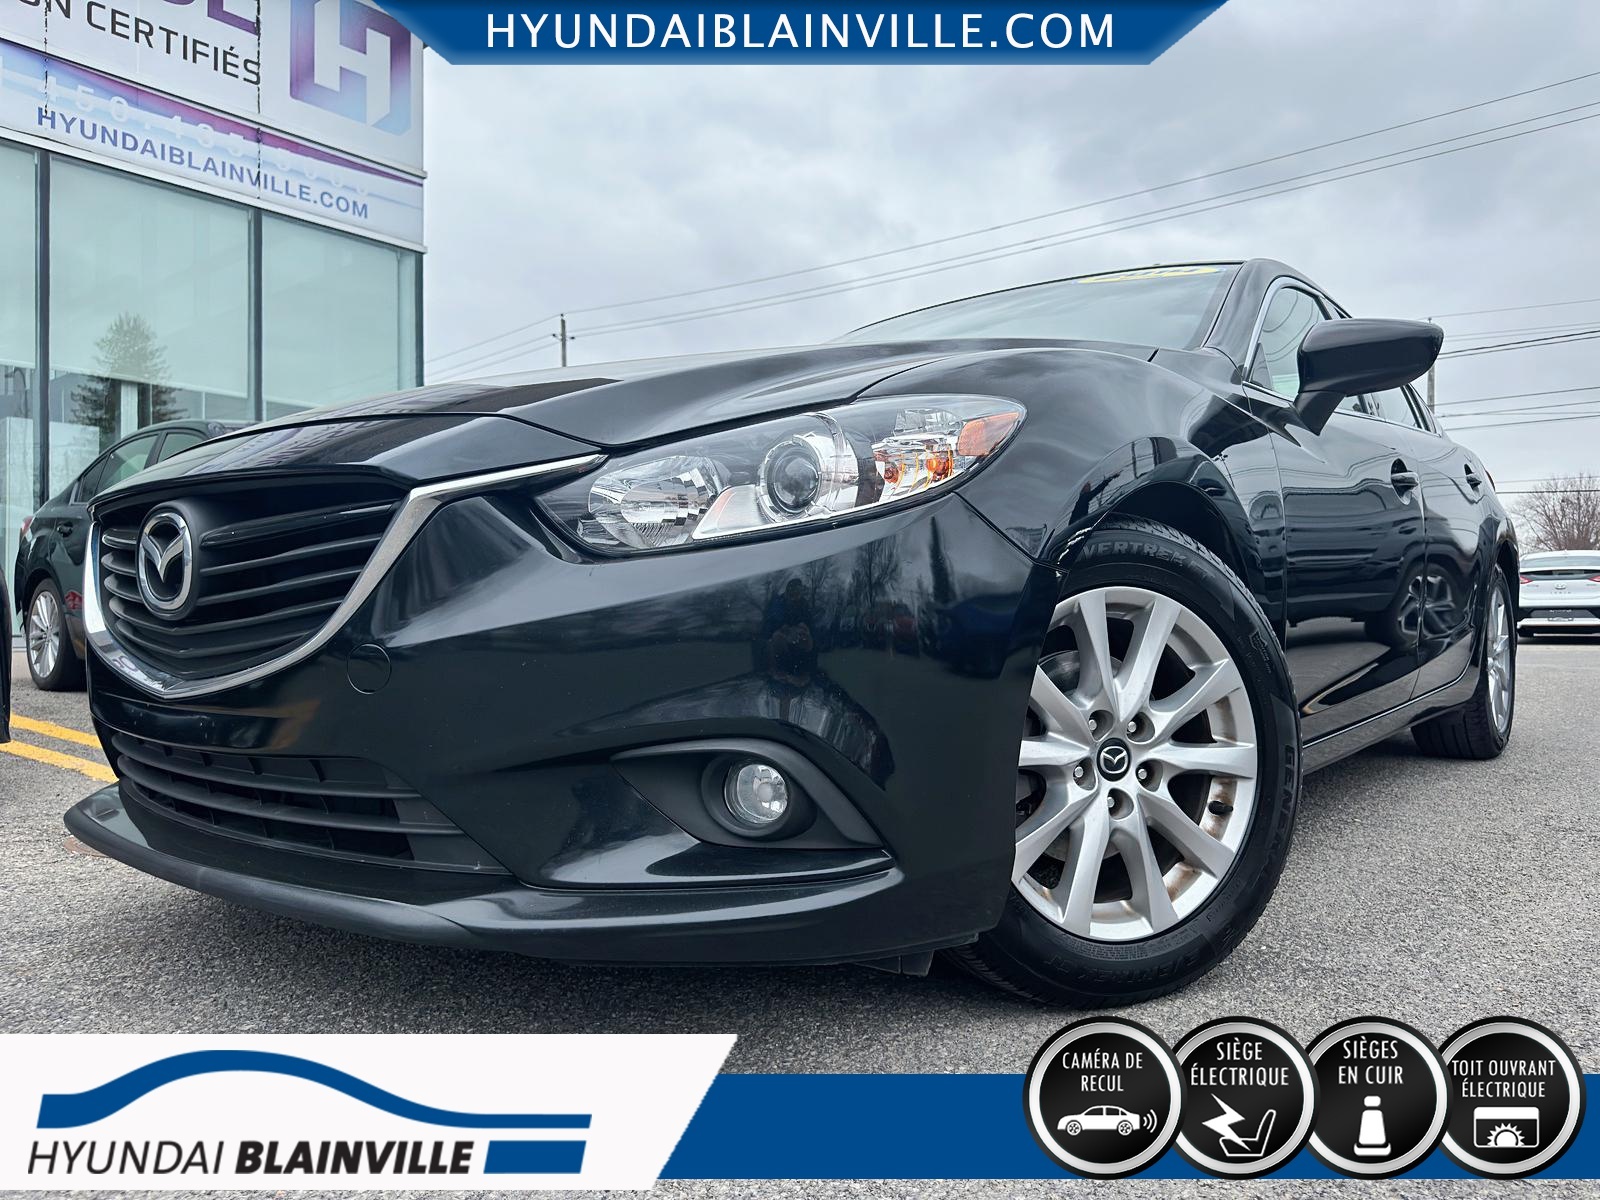 2014 Mazda Mazda6 GS, AUTOMATIQUE, CUIR, TOIT OUVRANT, MAGS, GPS+